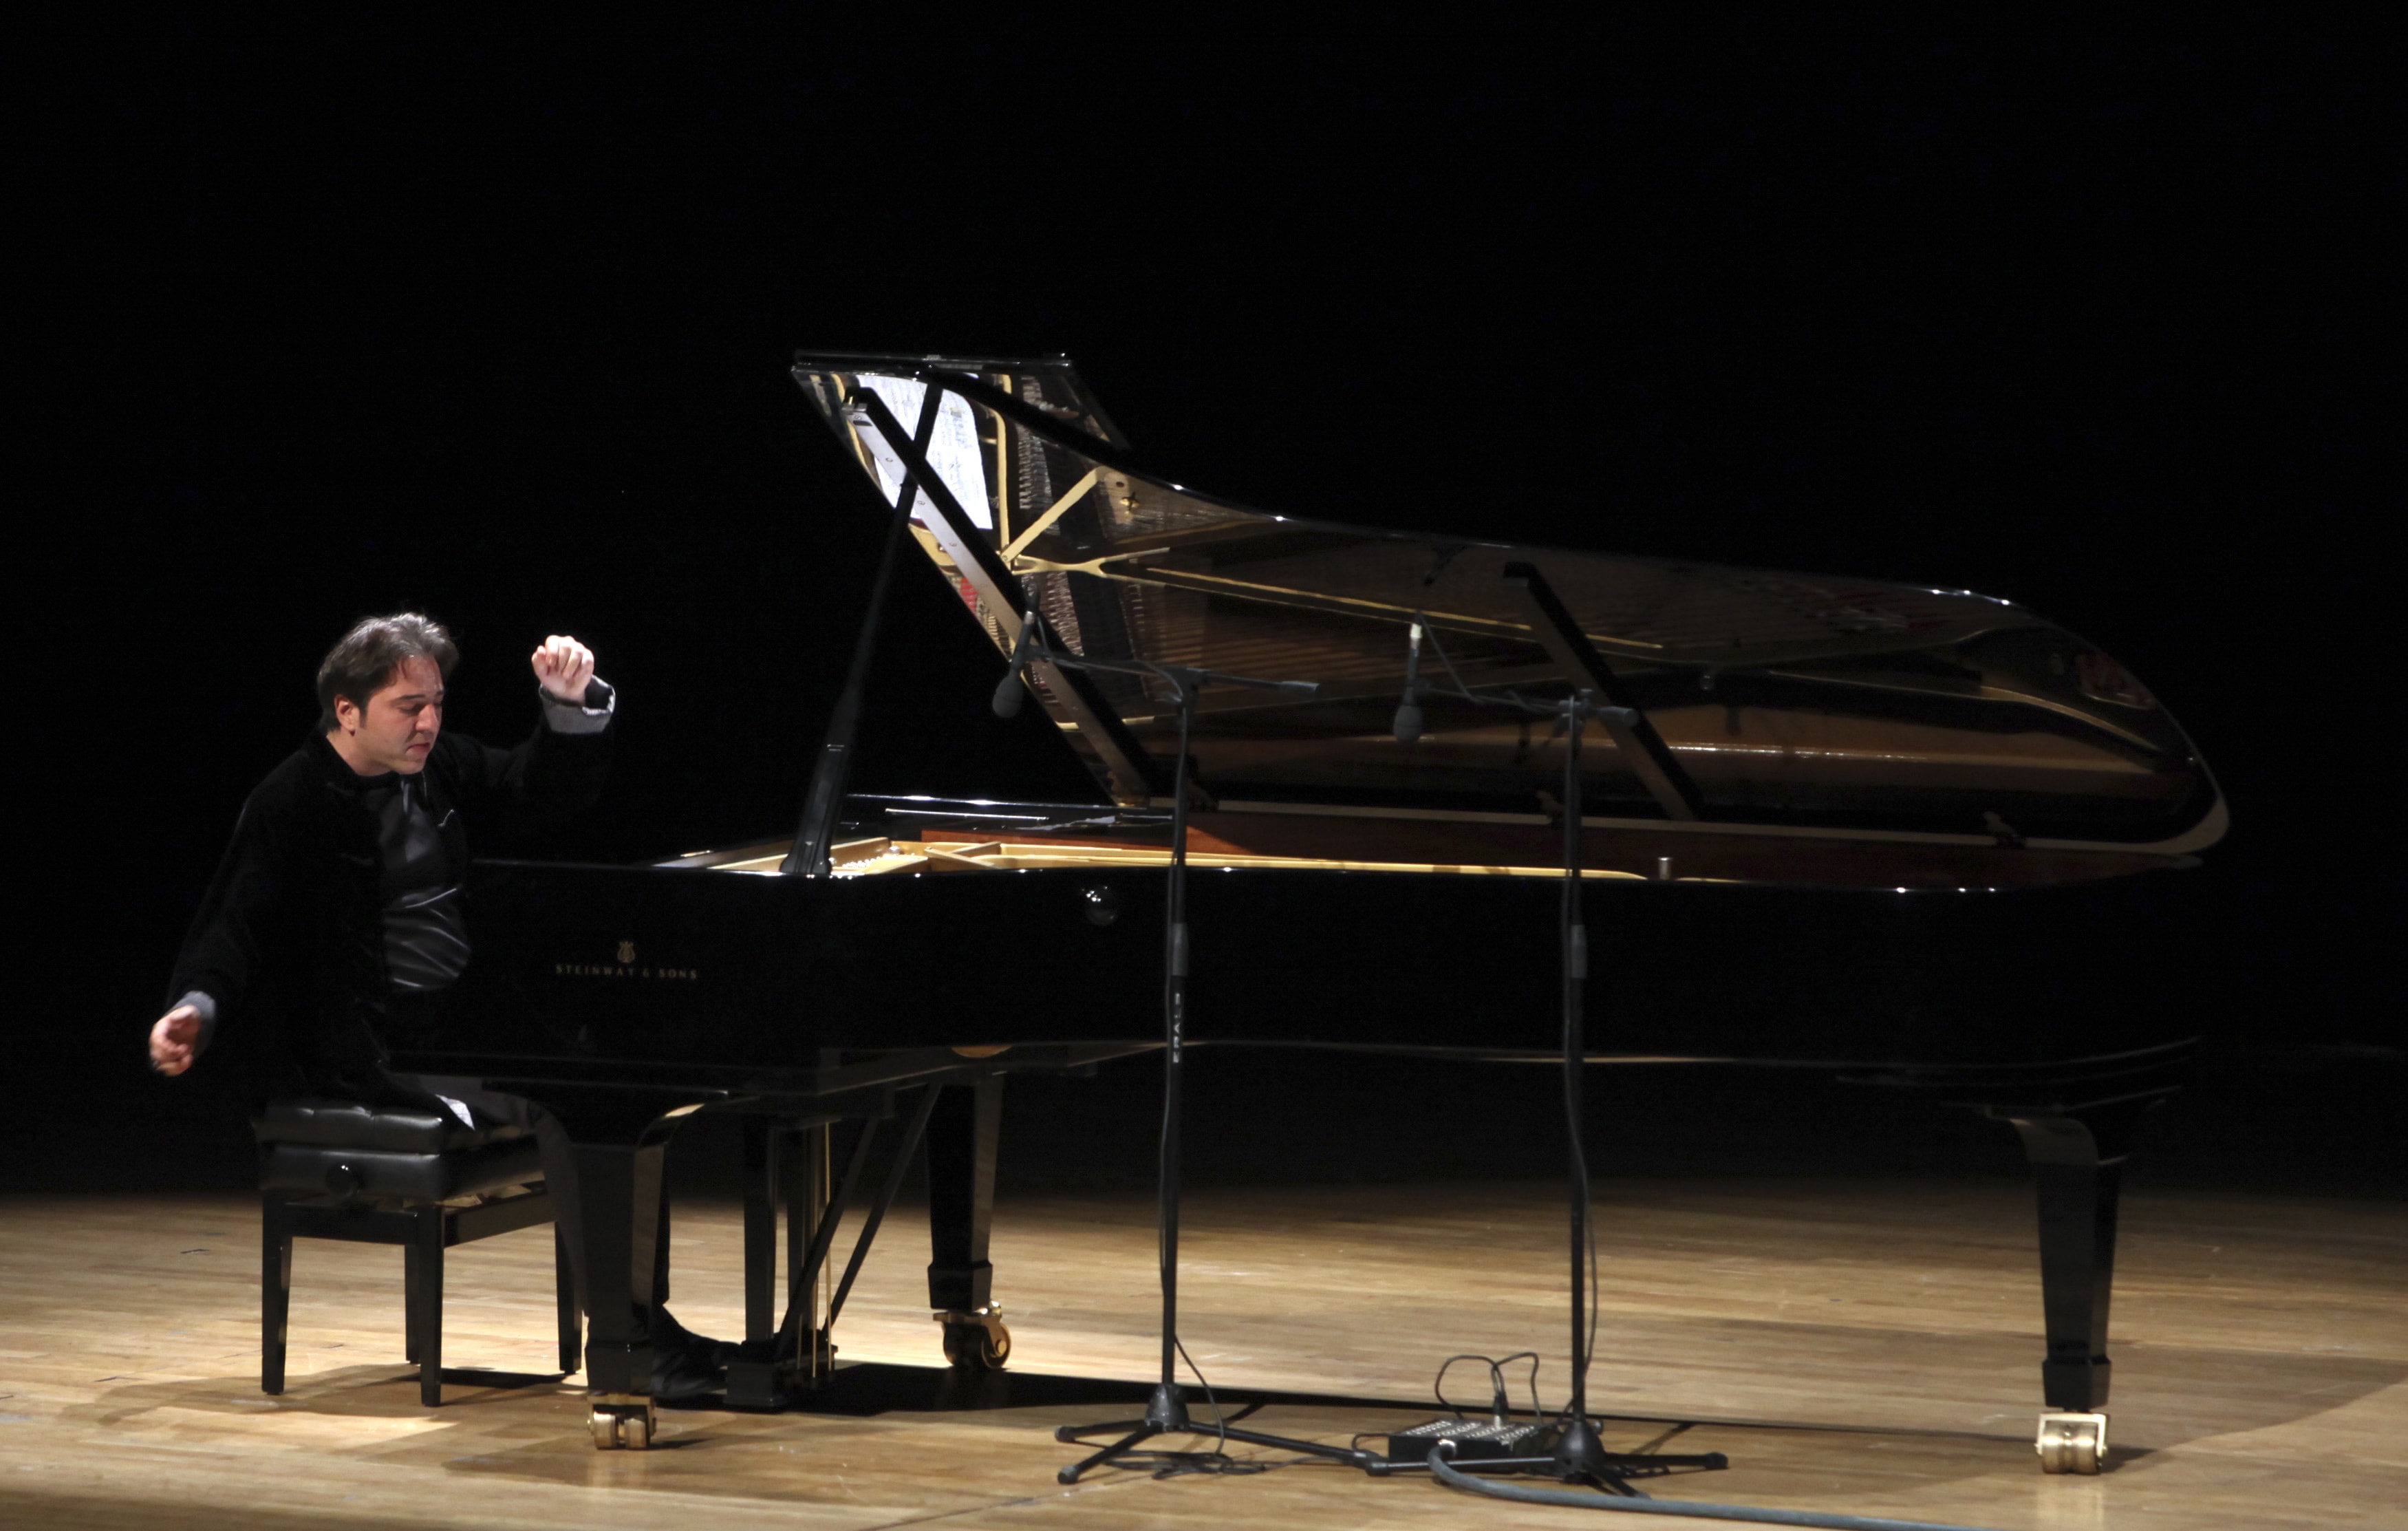 Turkish classical pianist Fazil Say performs during a concert in Ankara, 14 October 2010., Reuters